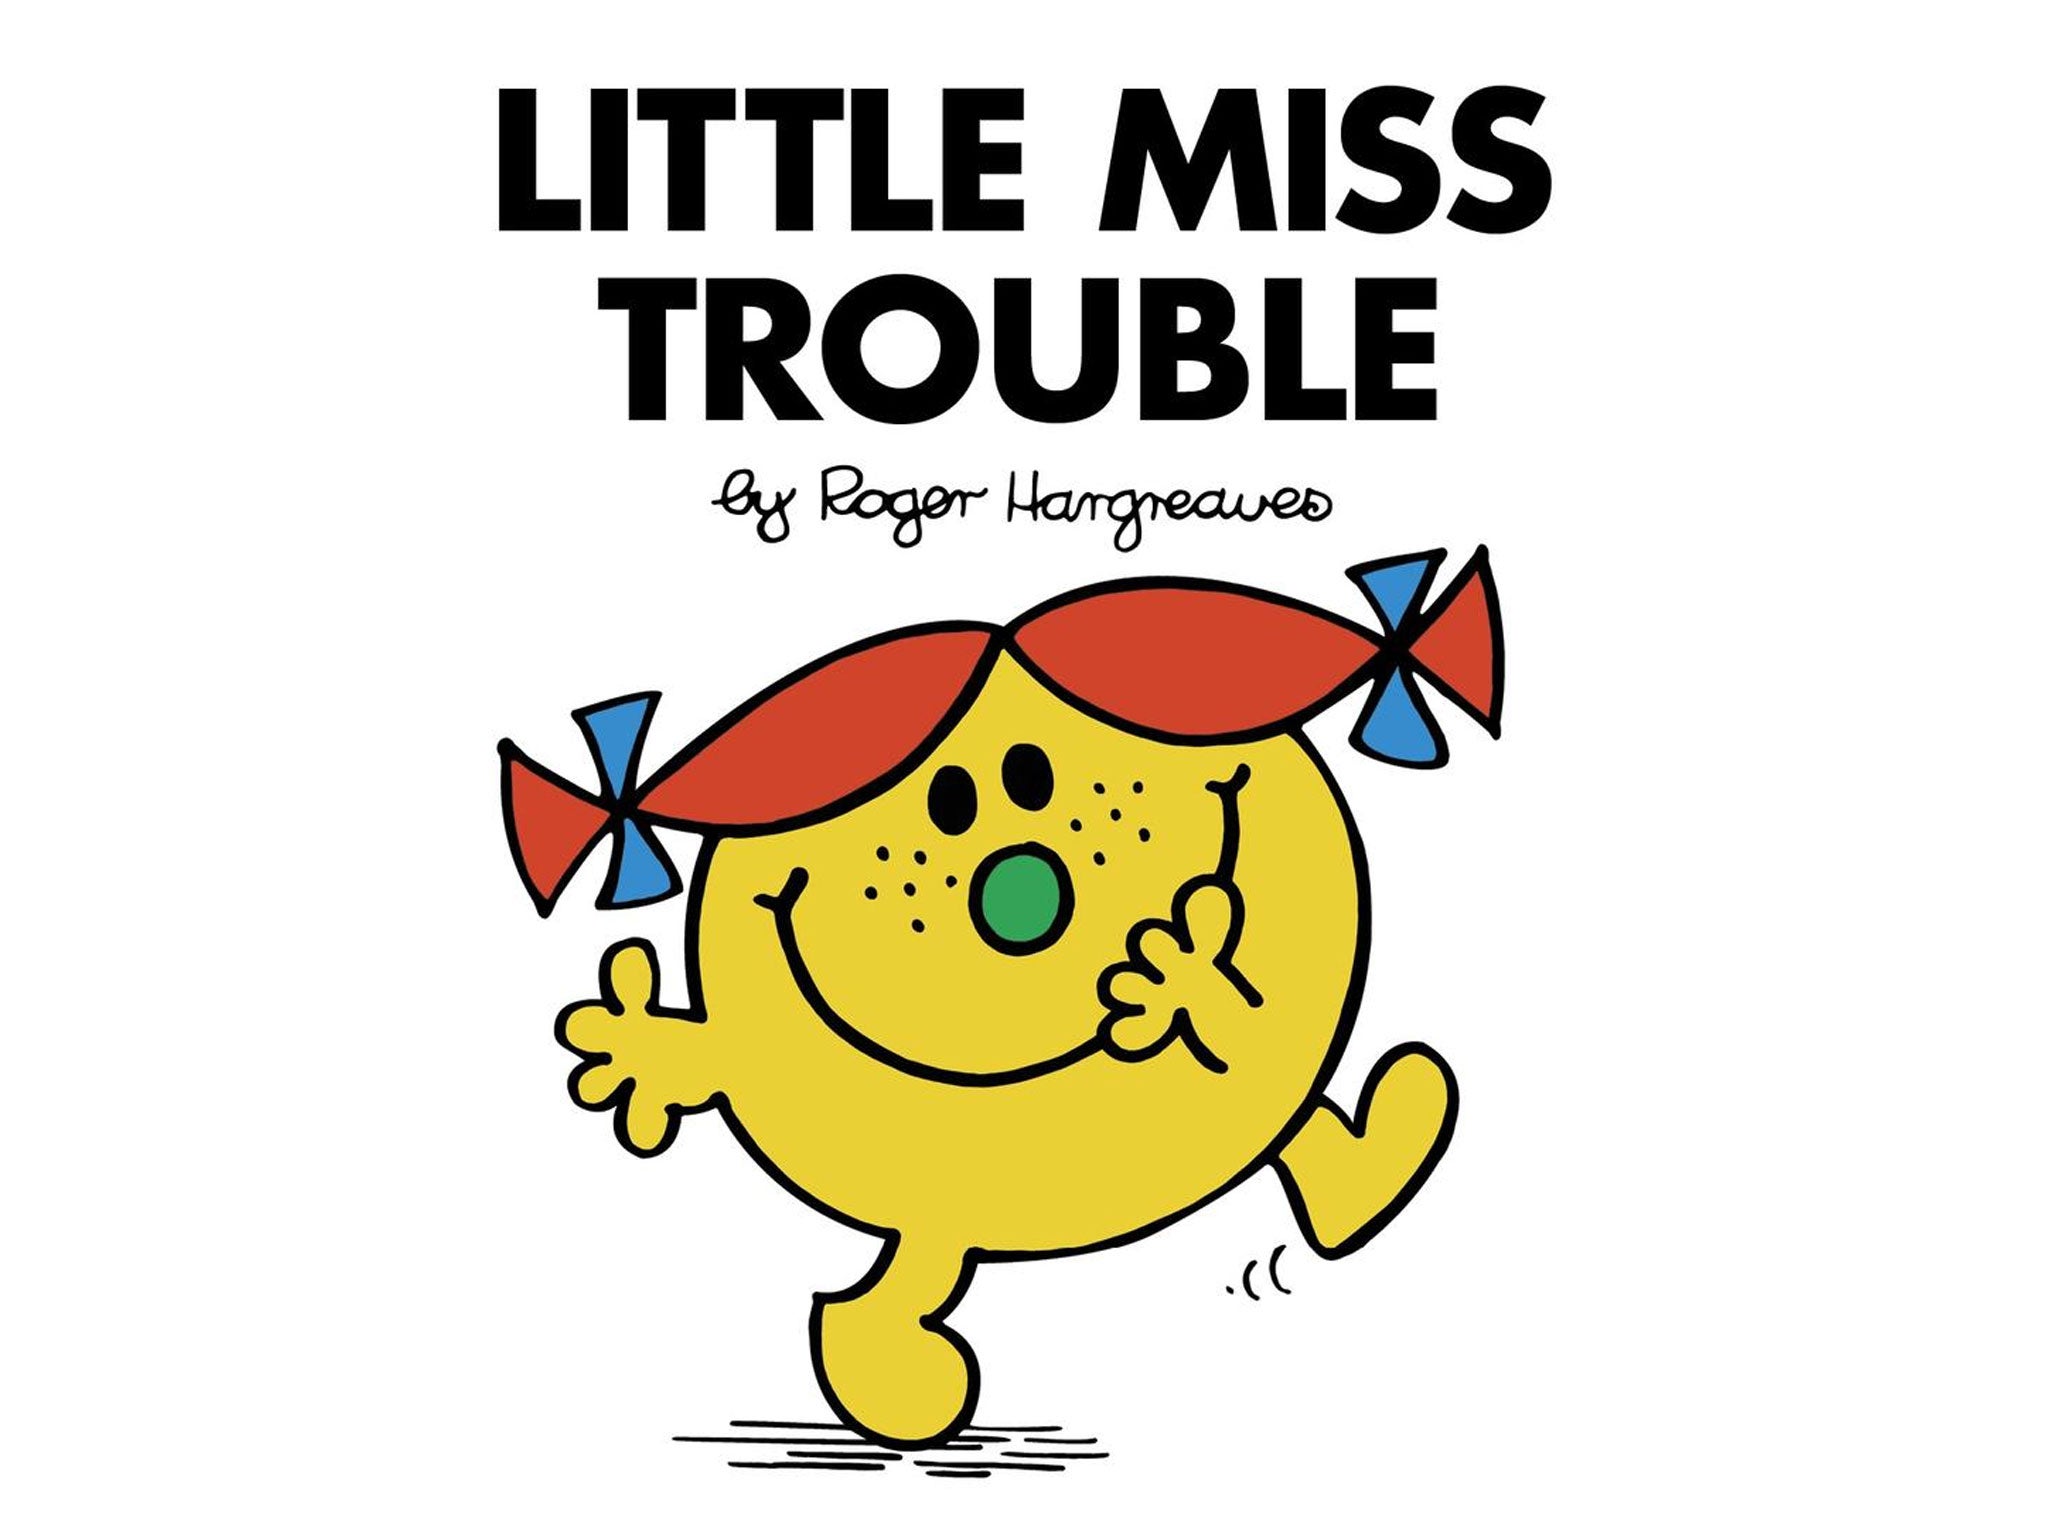 Little Miss books suggest women are 'less' than Mr Men, says Emily